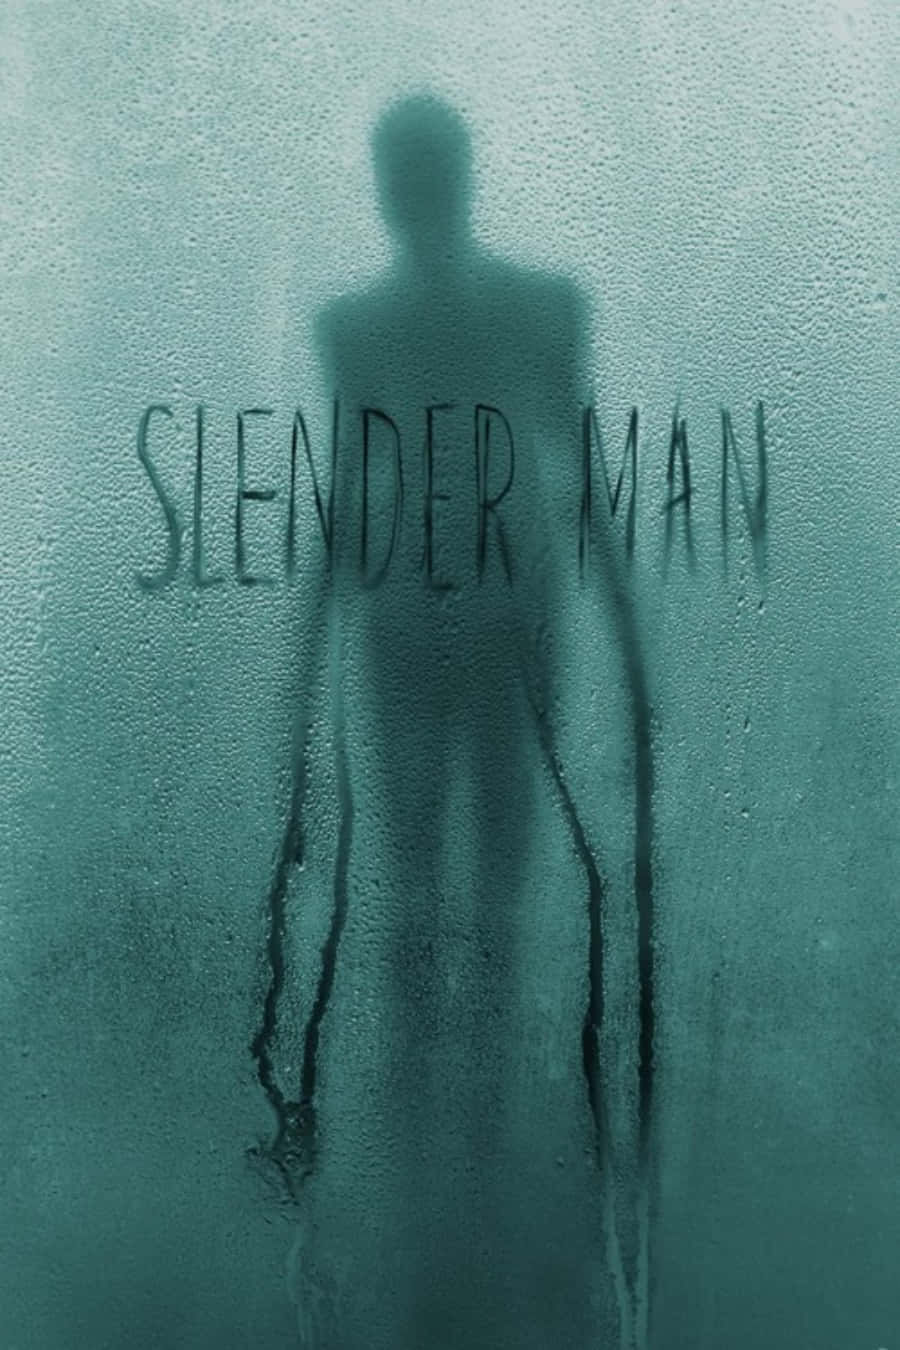 Cool Slender Man Poster Silhouette Picture